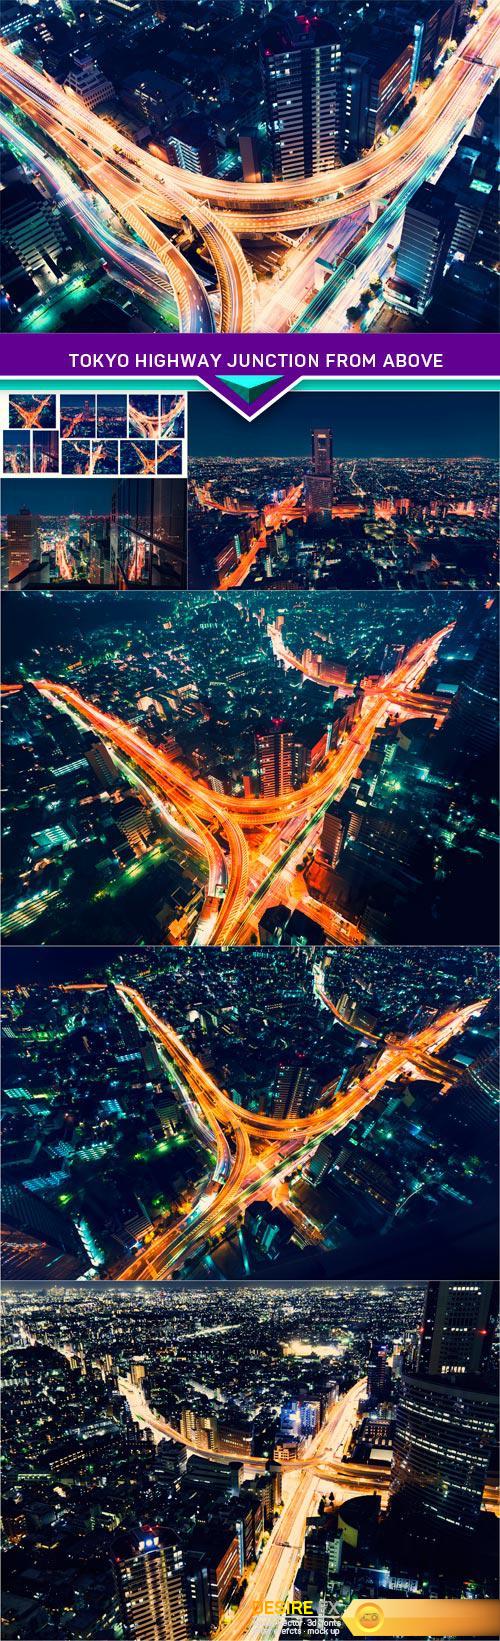 Tokyo highway junction from above 7X JPEG